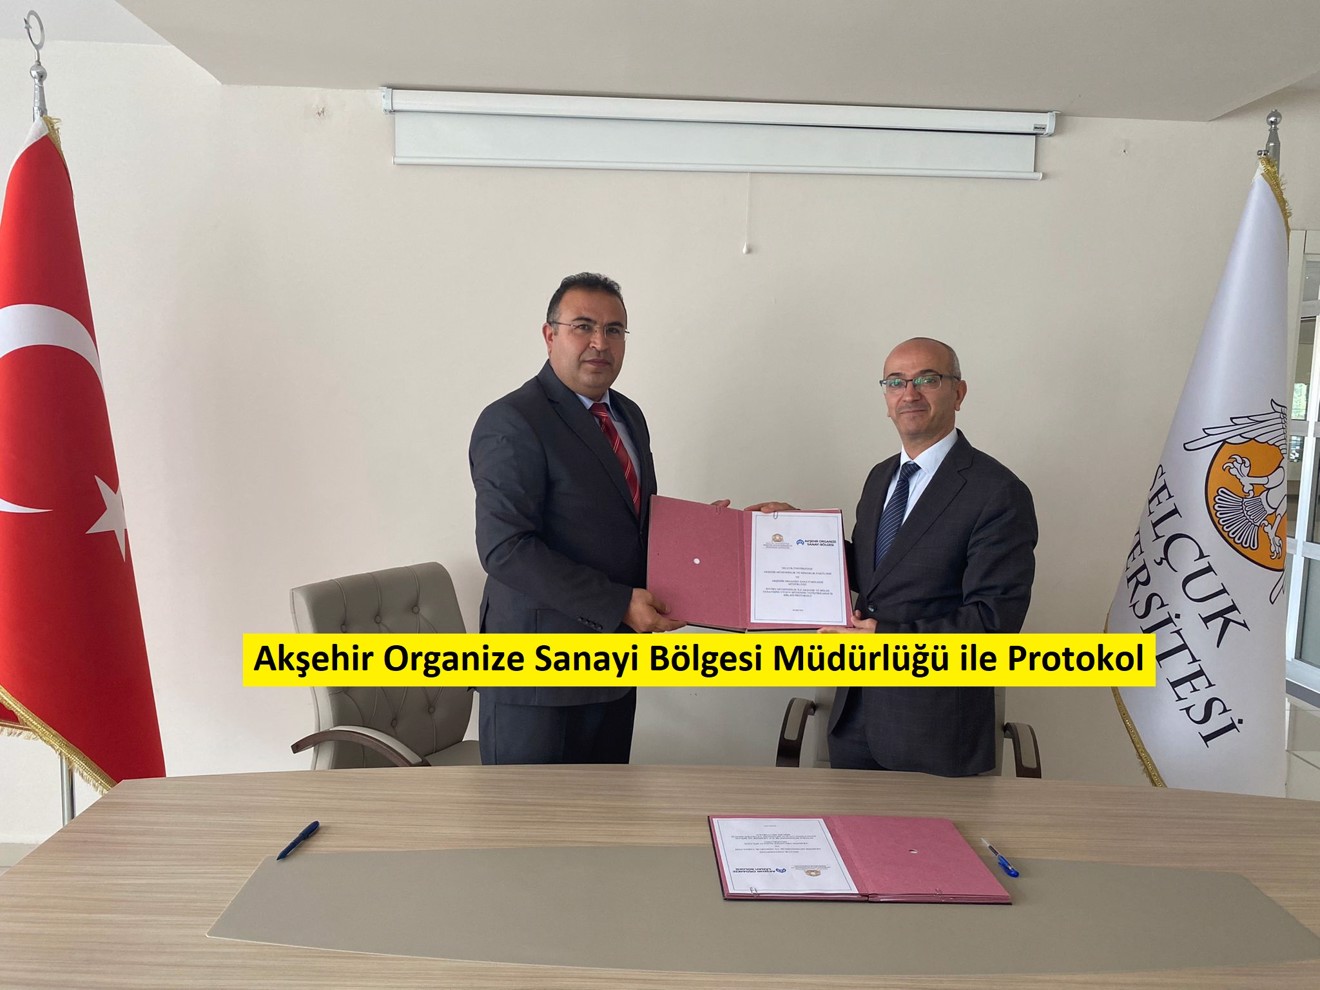 Protocol with Akşehir Faculty of Engineering and Architecture and Akşehir Organized Industrial Zone Directorate